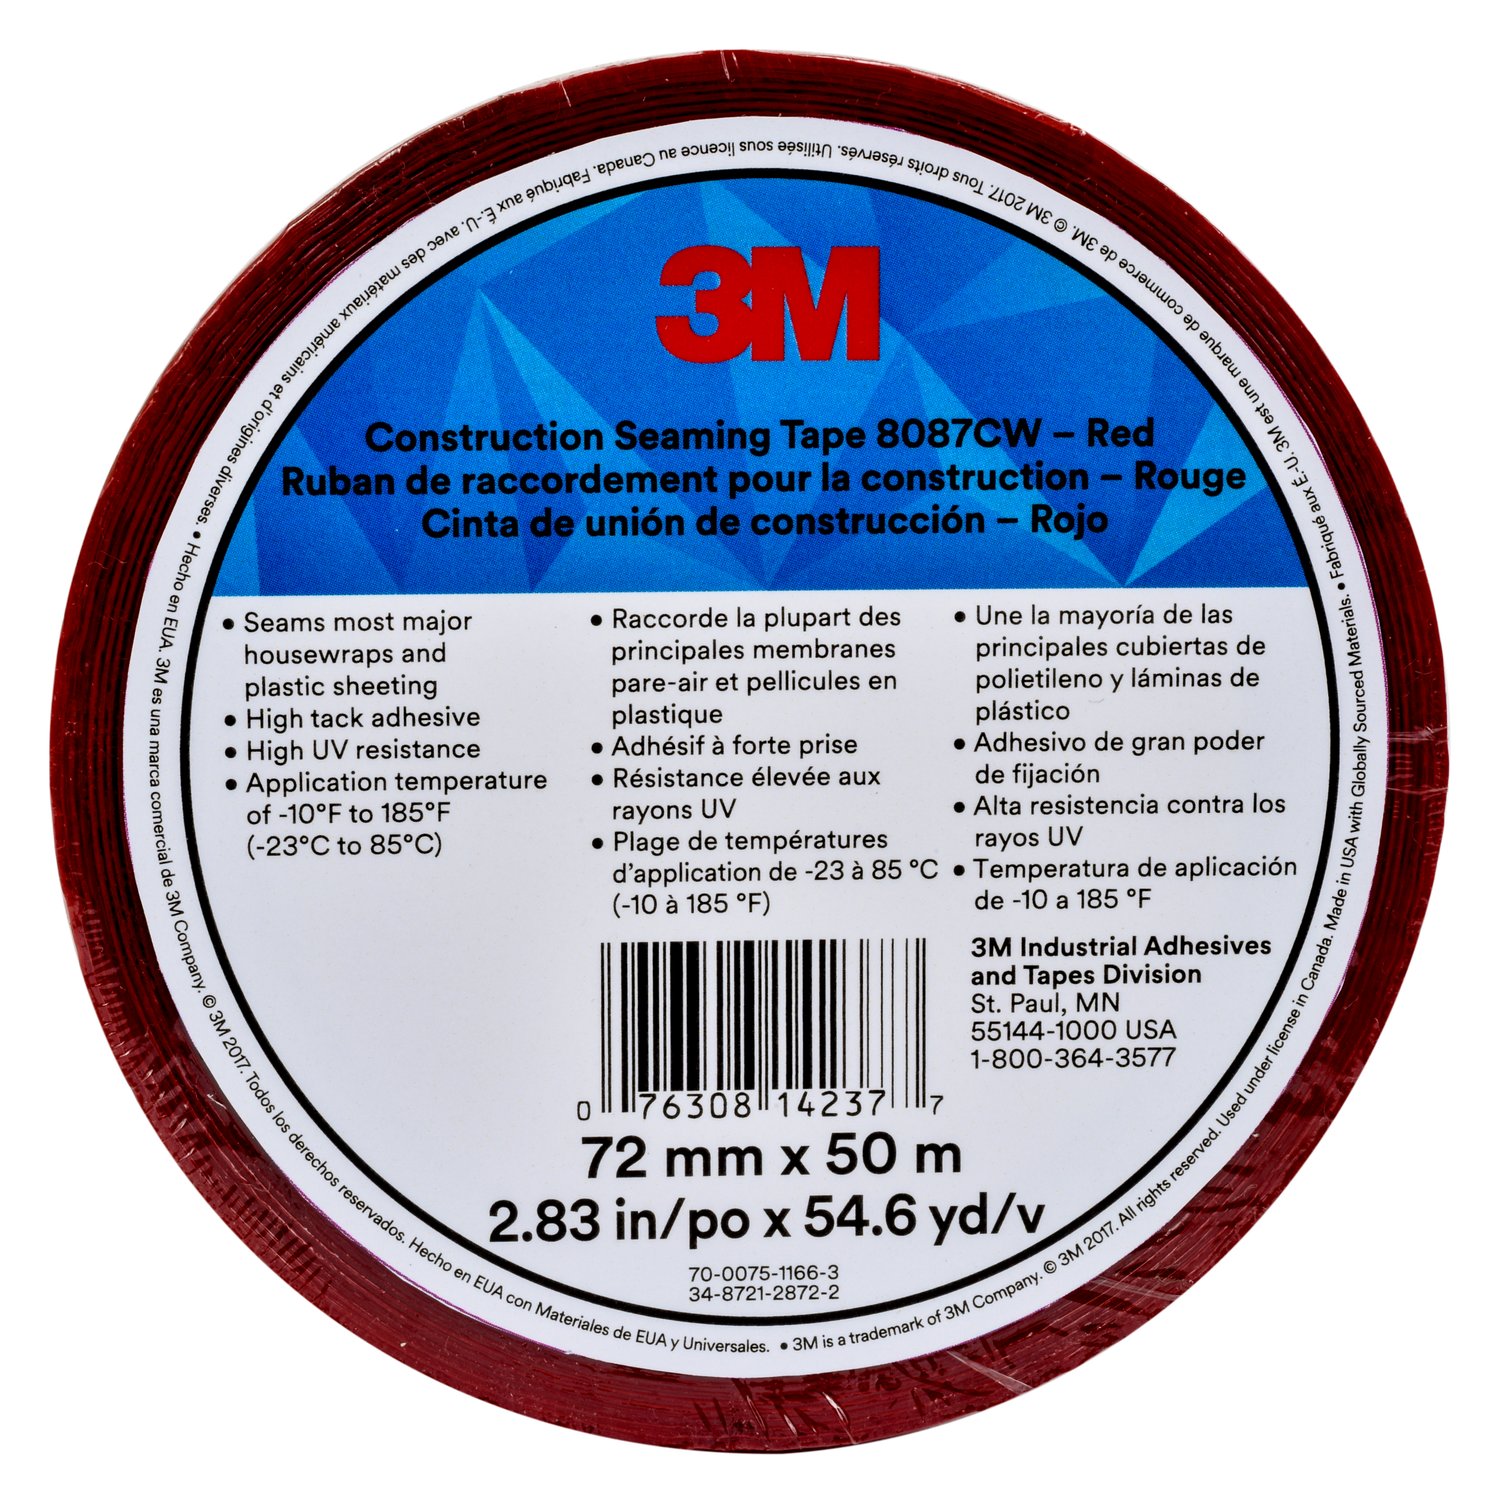 7010337895 - 3M Construction Seaming Tape 8087CW, Red, 72 mm x 50 m, 16 rolls per
case